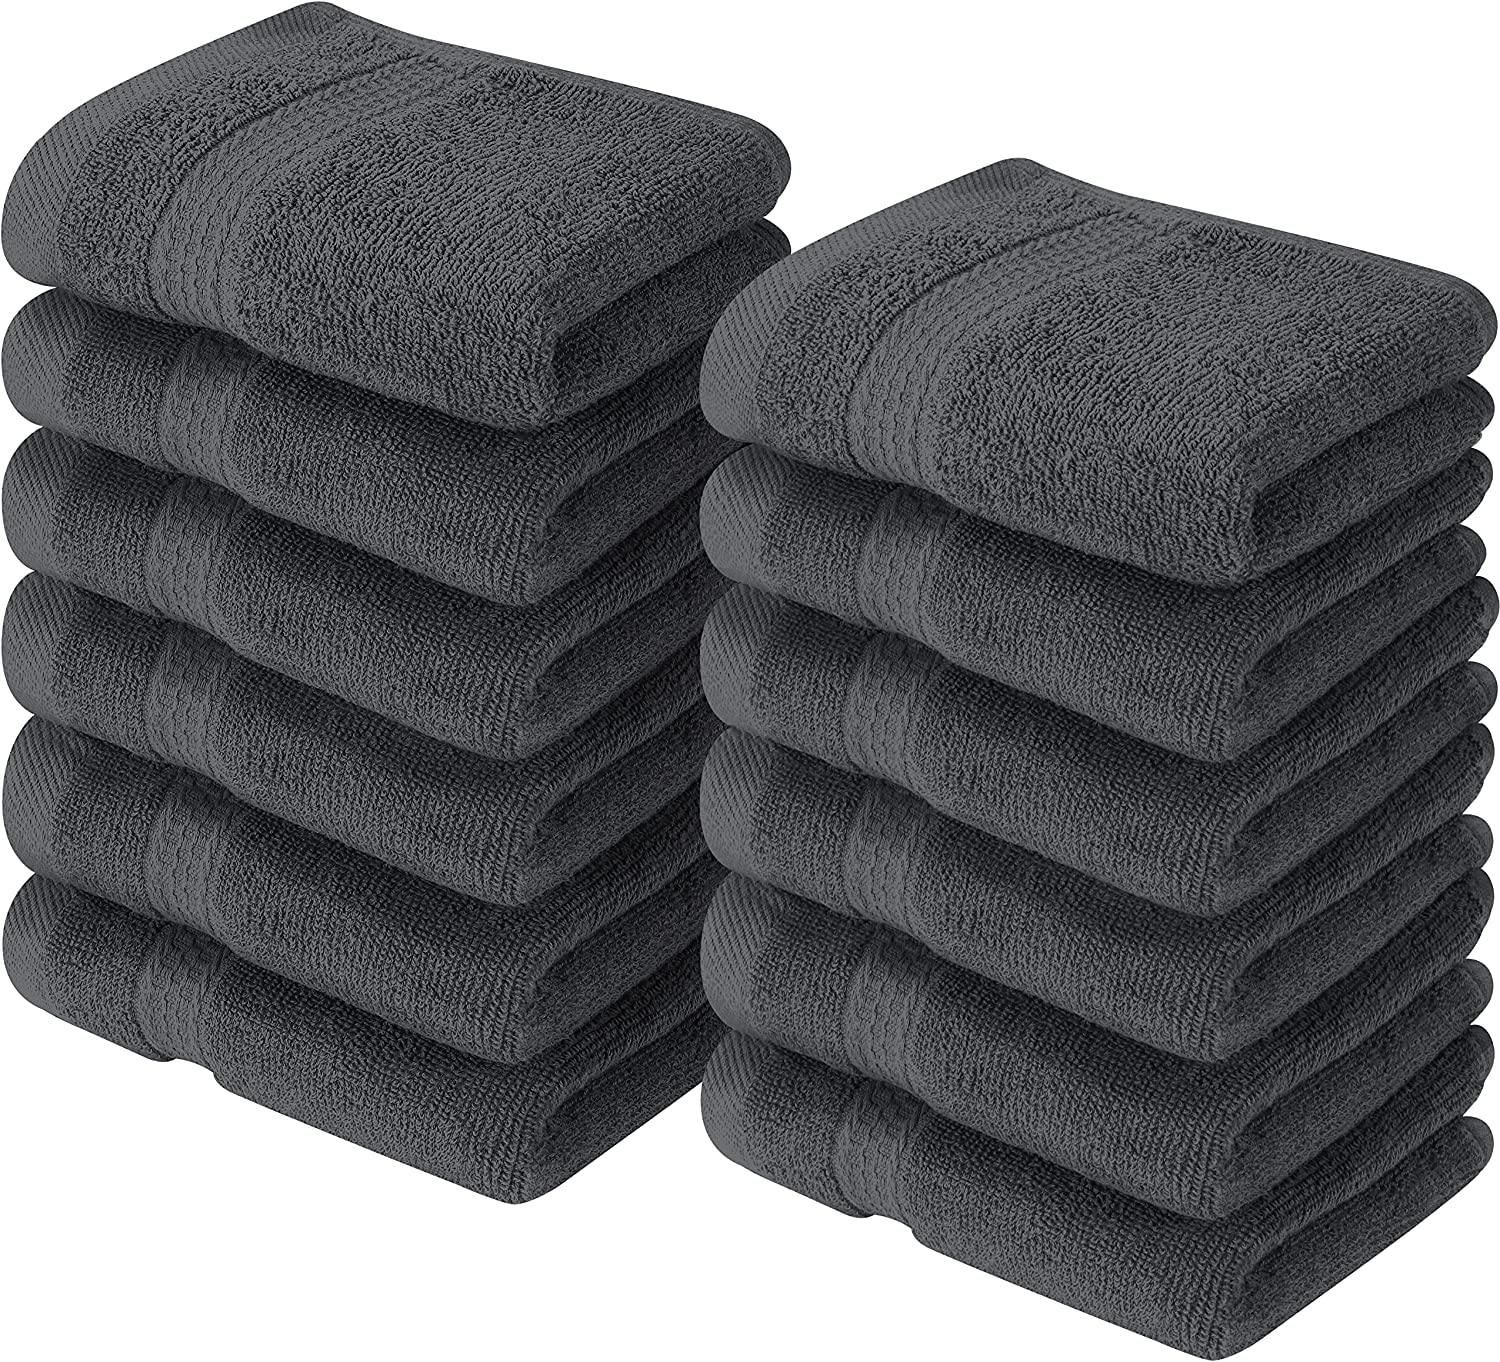 QUBA LINEN Wash Cloth Set - Pack of 24, 100% Cotton - Flannel Face Cloths,  Highly Absorbent and Soft Feel Fingertip Towels (12x12 Pack of 24)